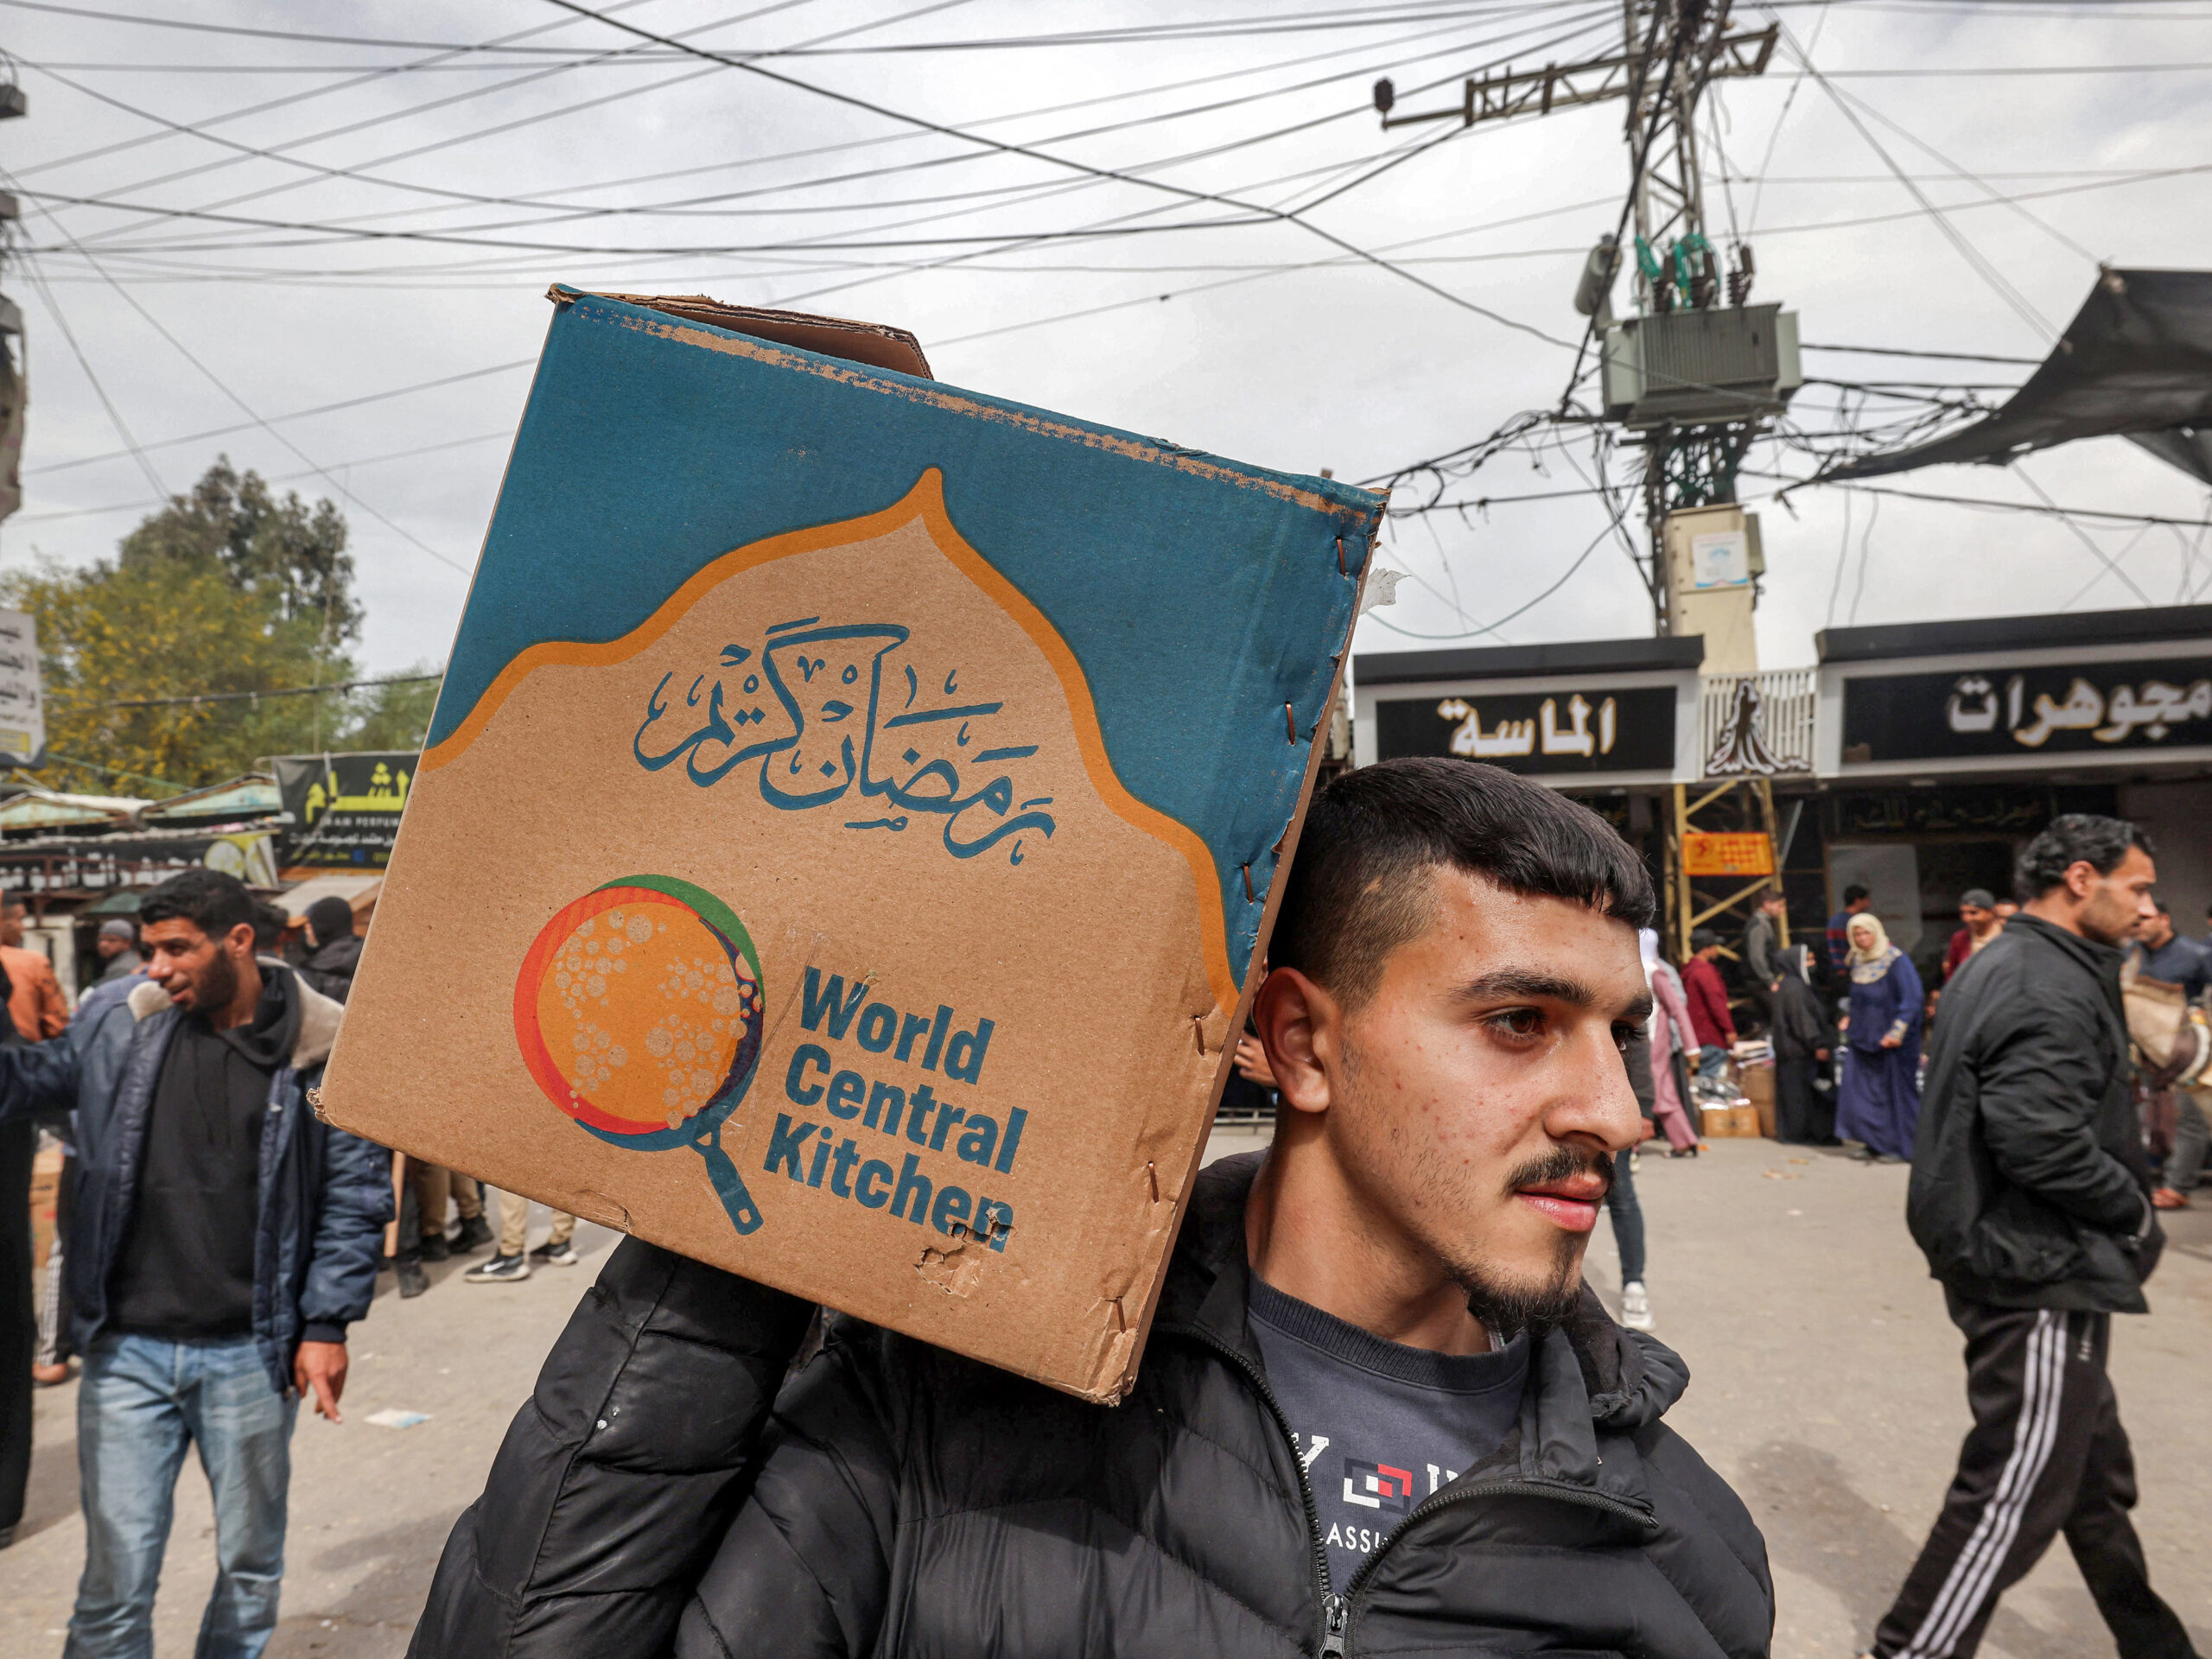 People in Gaza are starving to death. 5 things to know about efforts to feed them